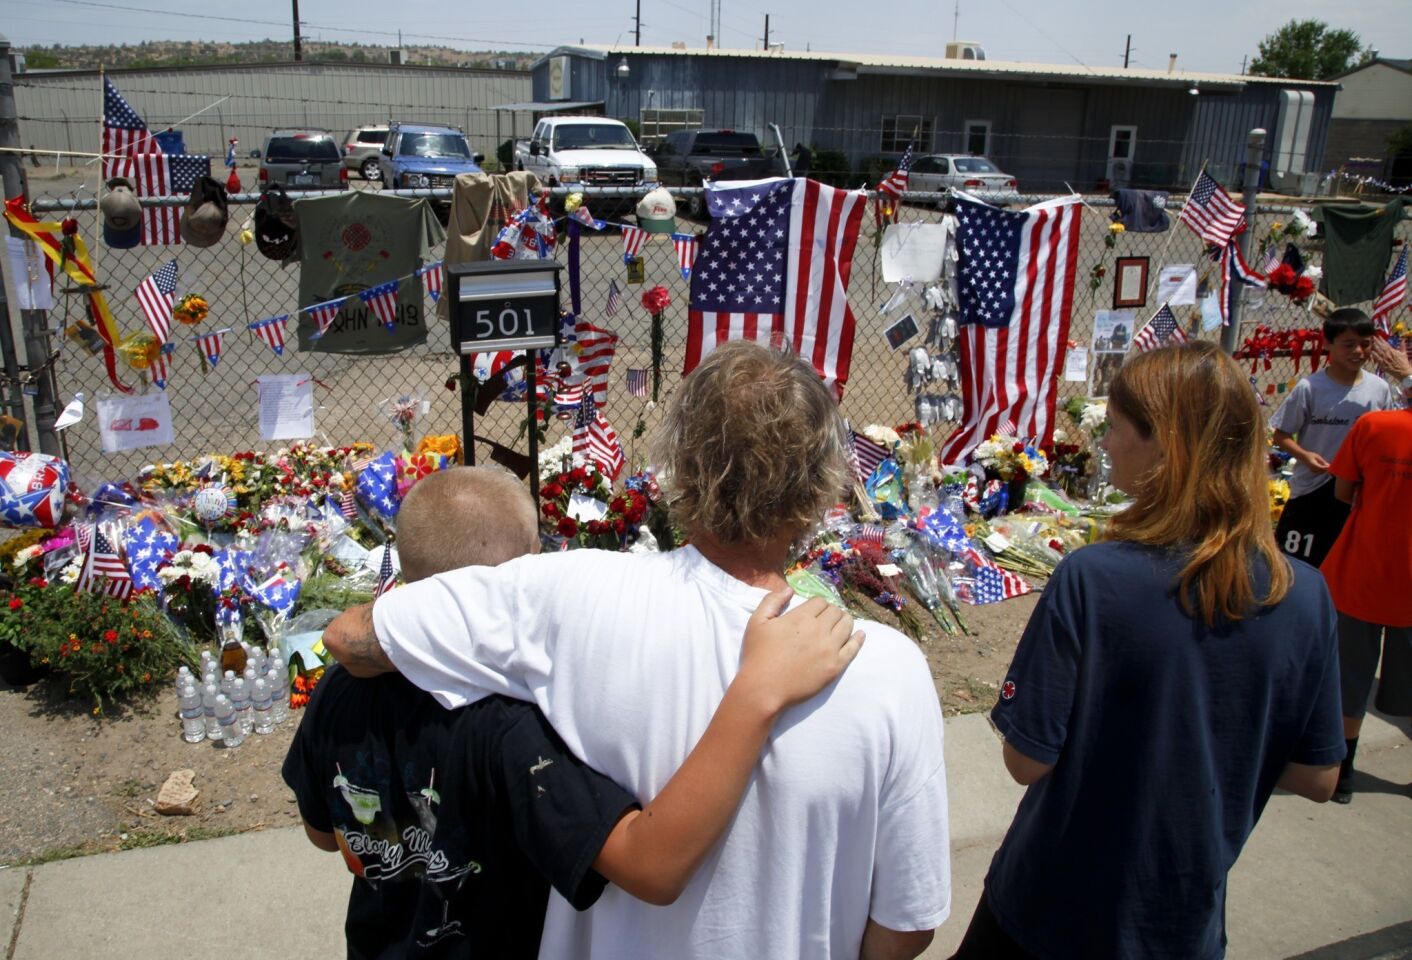 The firefighters were killed Sunday when flames tearing through the town of Yarnell, Ariz., overtook them.